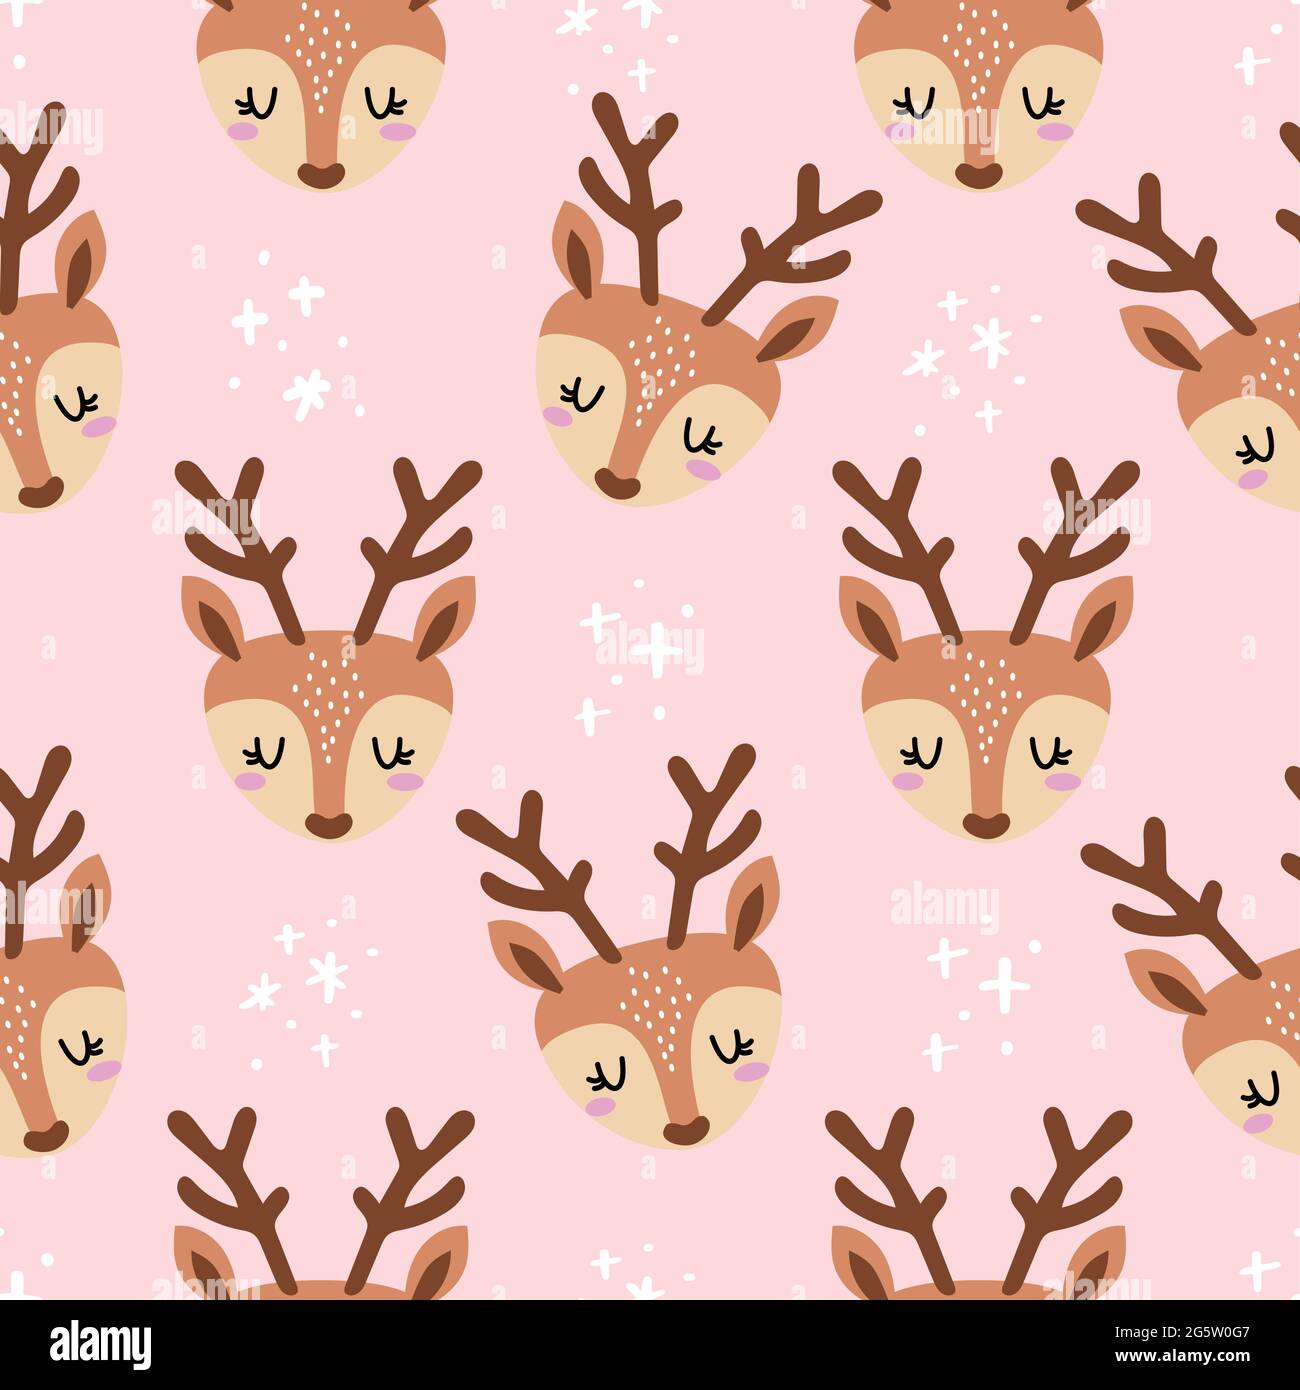 Deer head pattern design in beautiful colors - funny hand drawn doodle, seamless pattern. Designer poster or t-shirt textile graphic design. Wallpaper Stock Vector